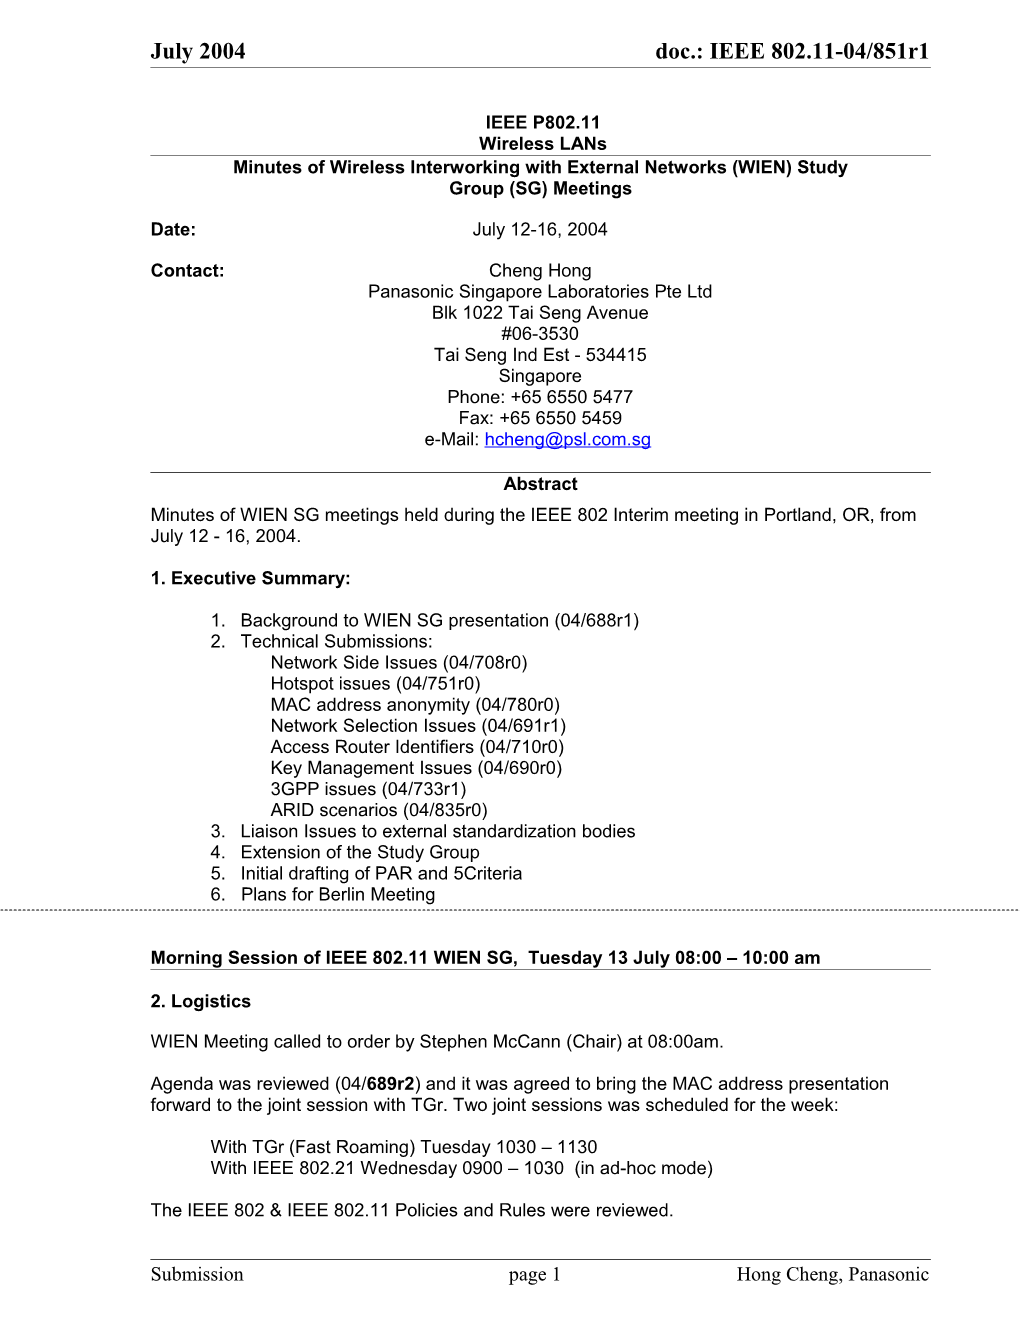 Minutes of Wireless Interworking with External Networks (WIEN) Study Group (SG) Meetings